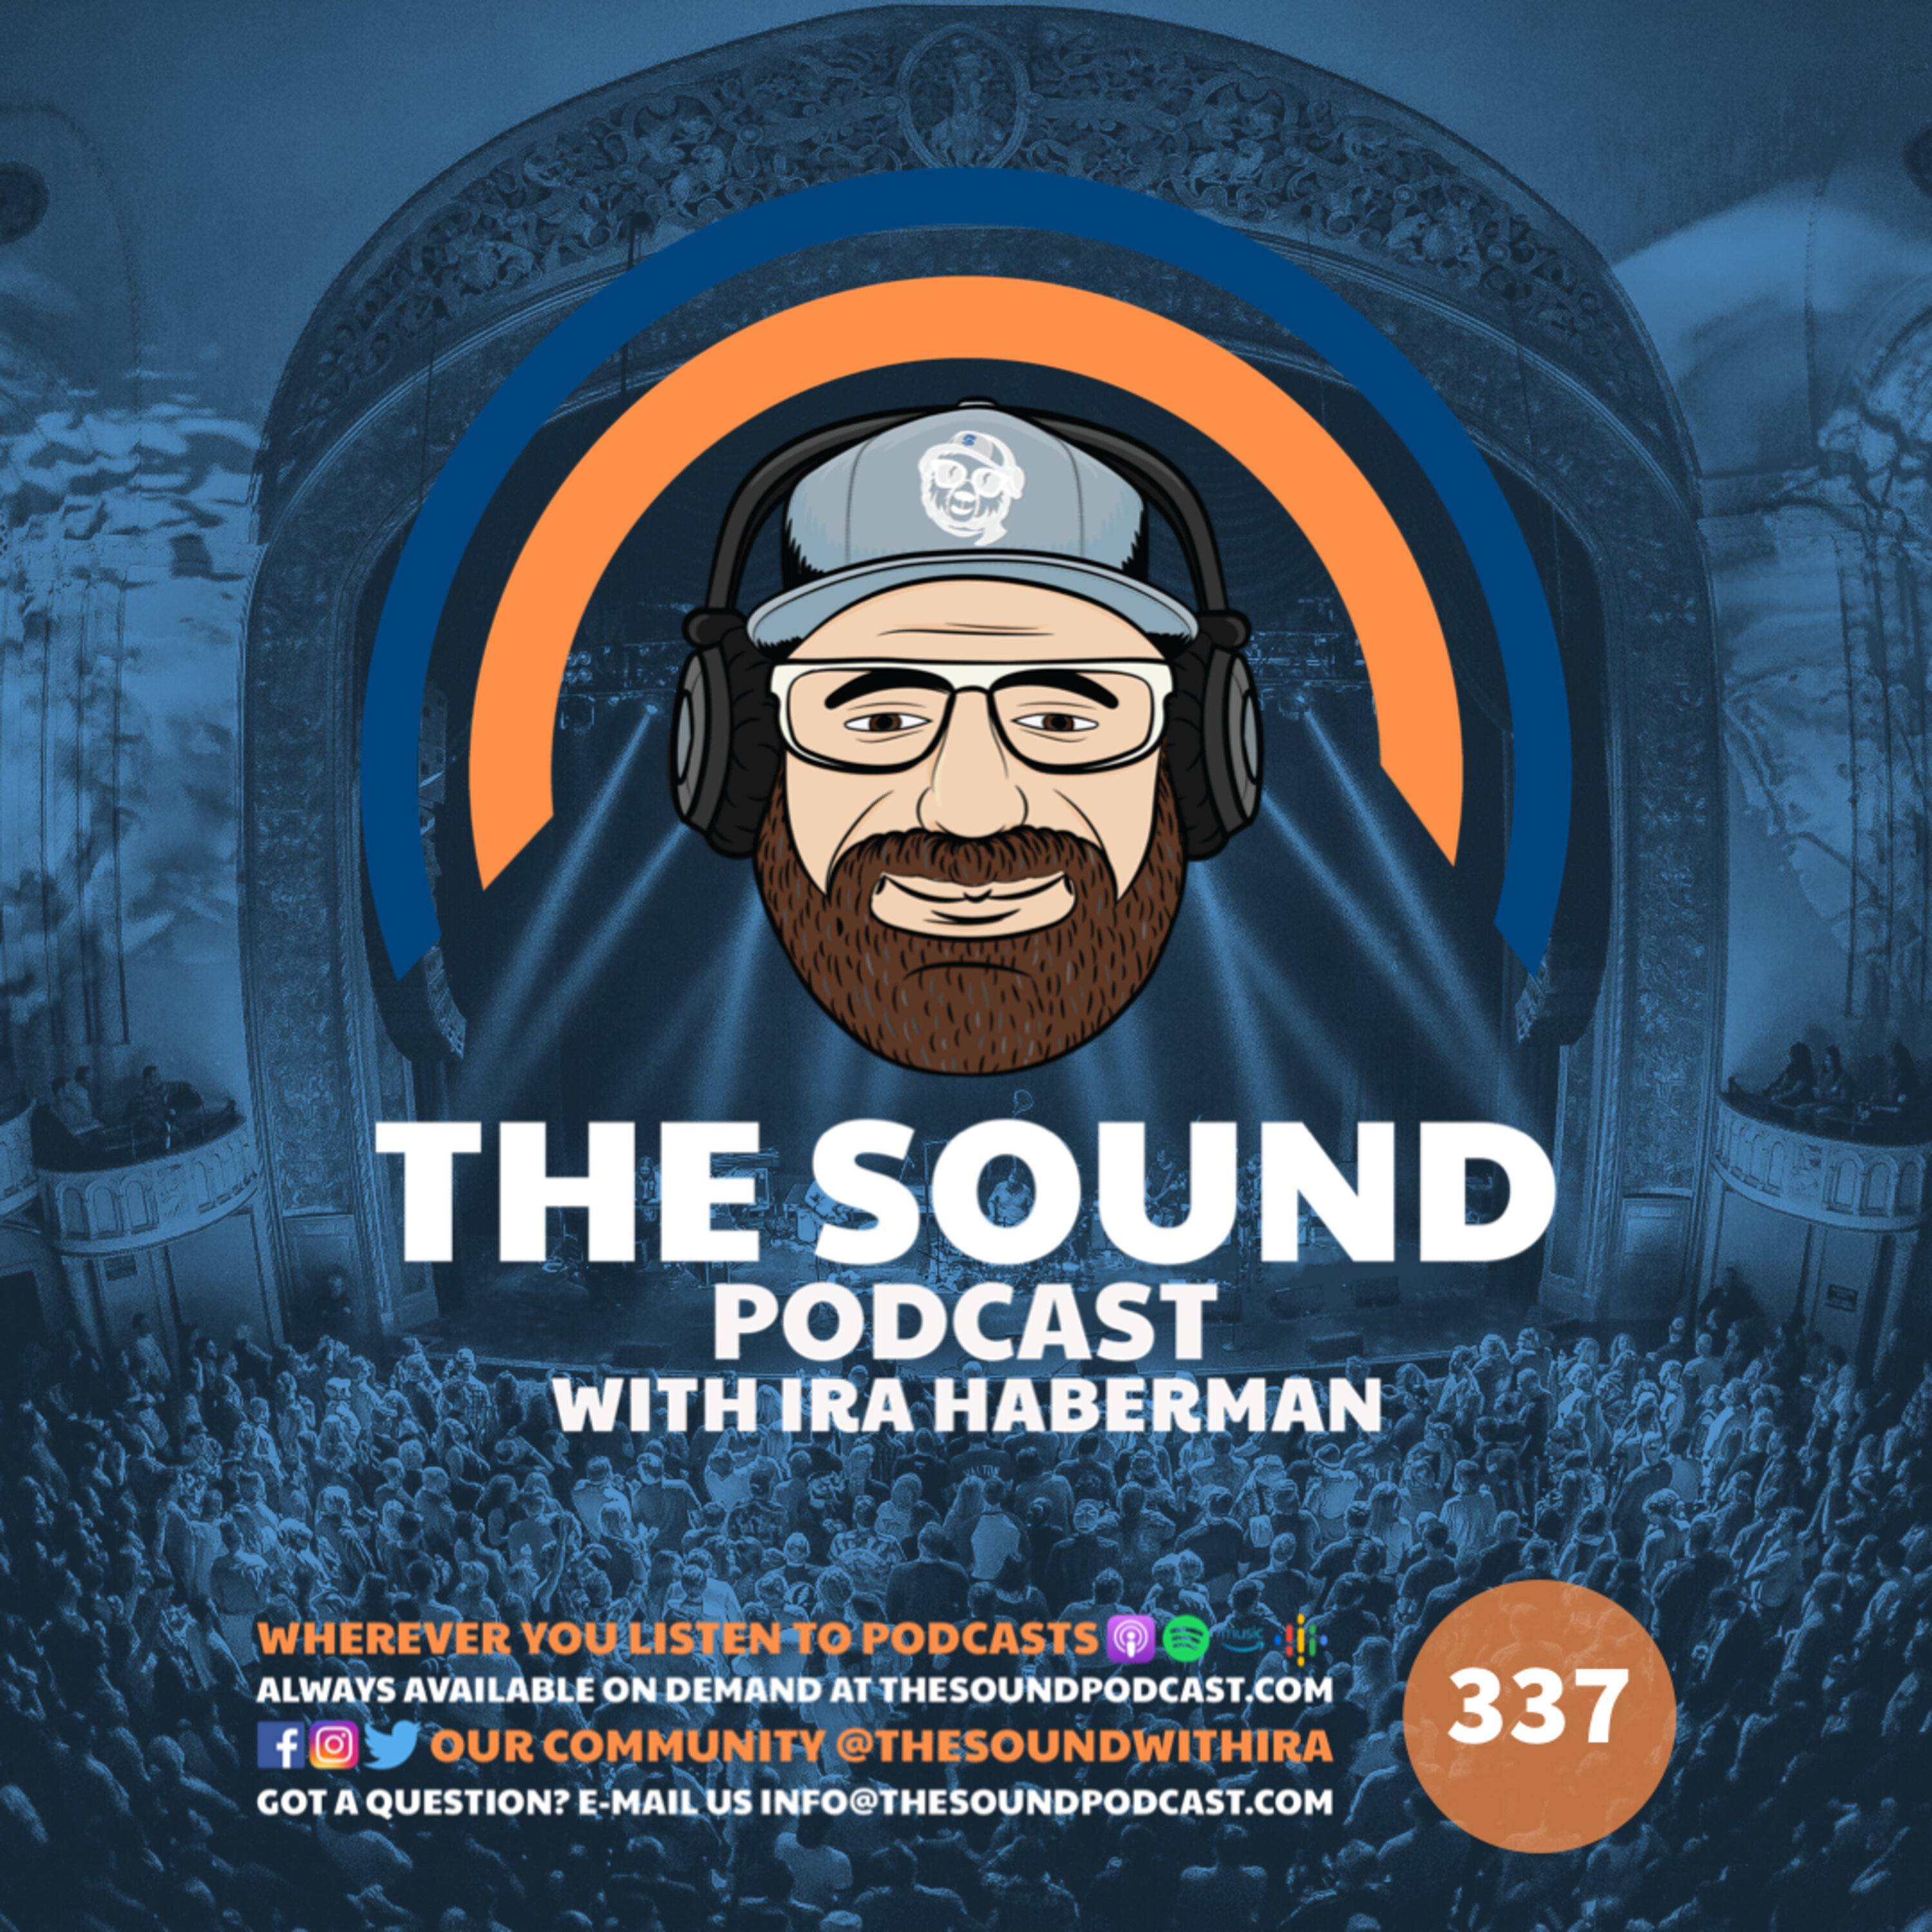 The Sound Podcast - August 30, 2021.